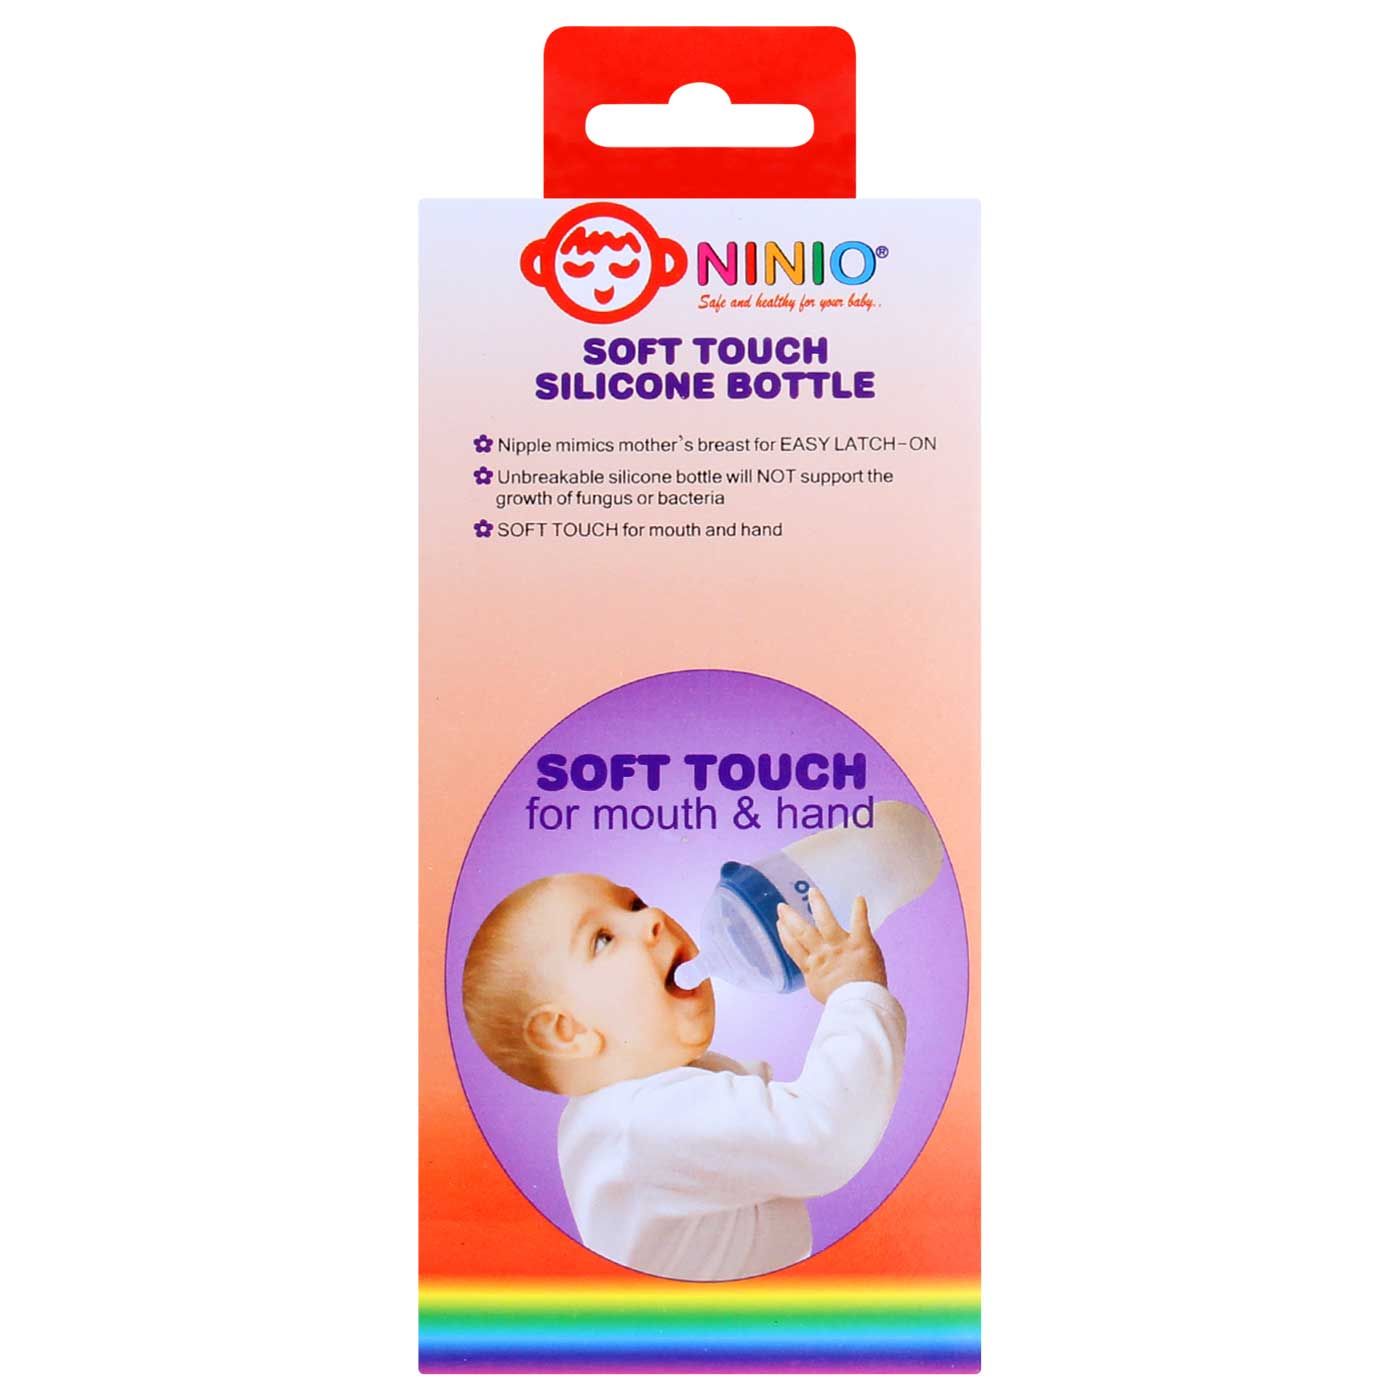 Ninio Silicone Bottle with Filter 7oz Blue - 8